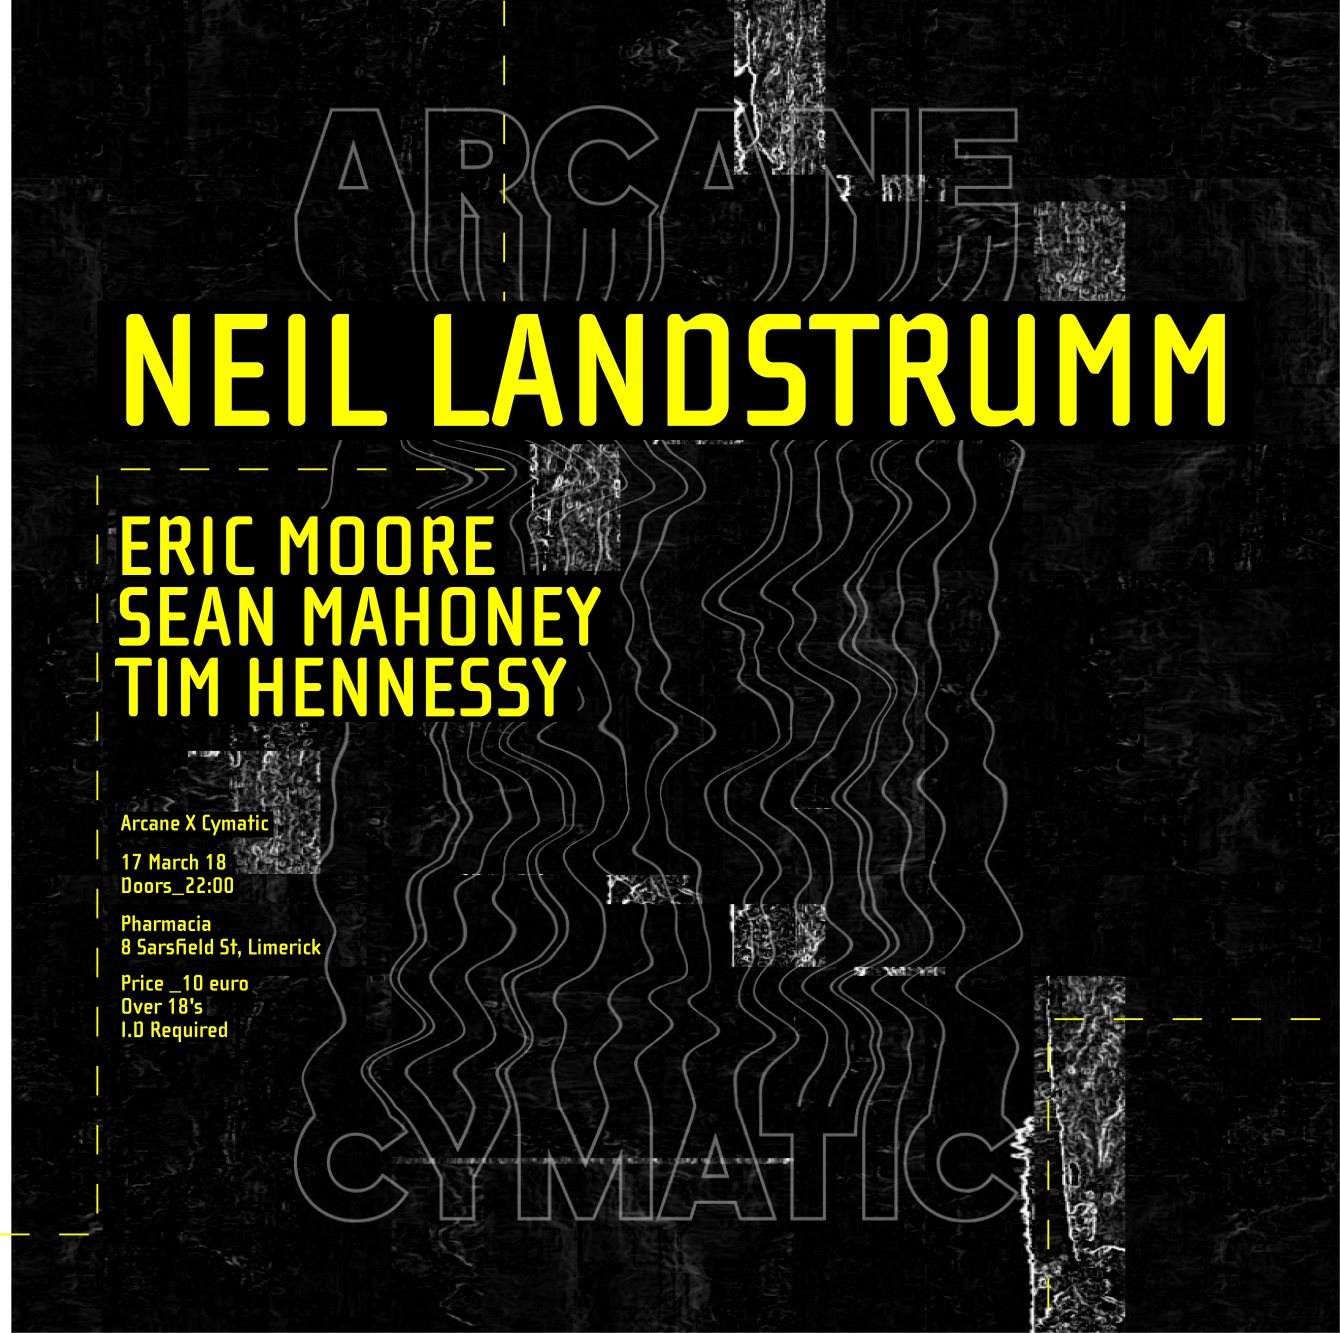 Arcane x Cymatic Paddy's Day with Neil Landstrumm / Eric Moore / Sean Mahoney / Tim Henne - フライヤー裏